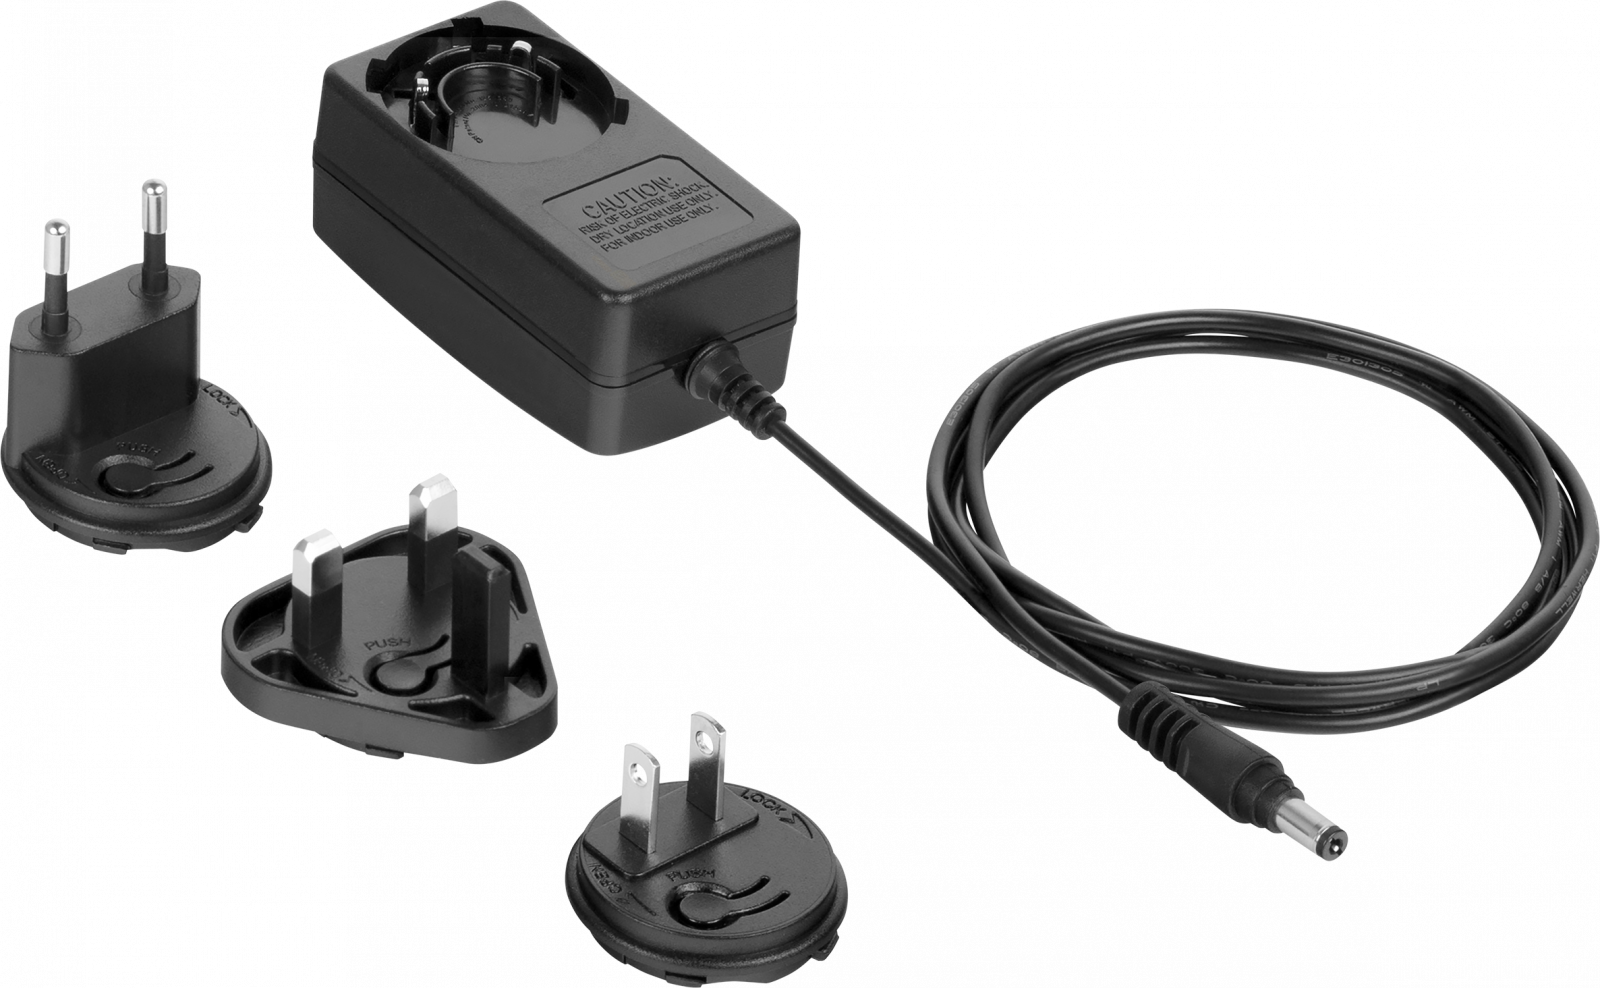 https://www.hw-group.com/files/styles/large/public/devices-photos/7366-12v15a-wall-plug-adaptor-int/12v-1.5awallplugadaptorint.png